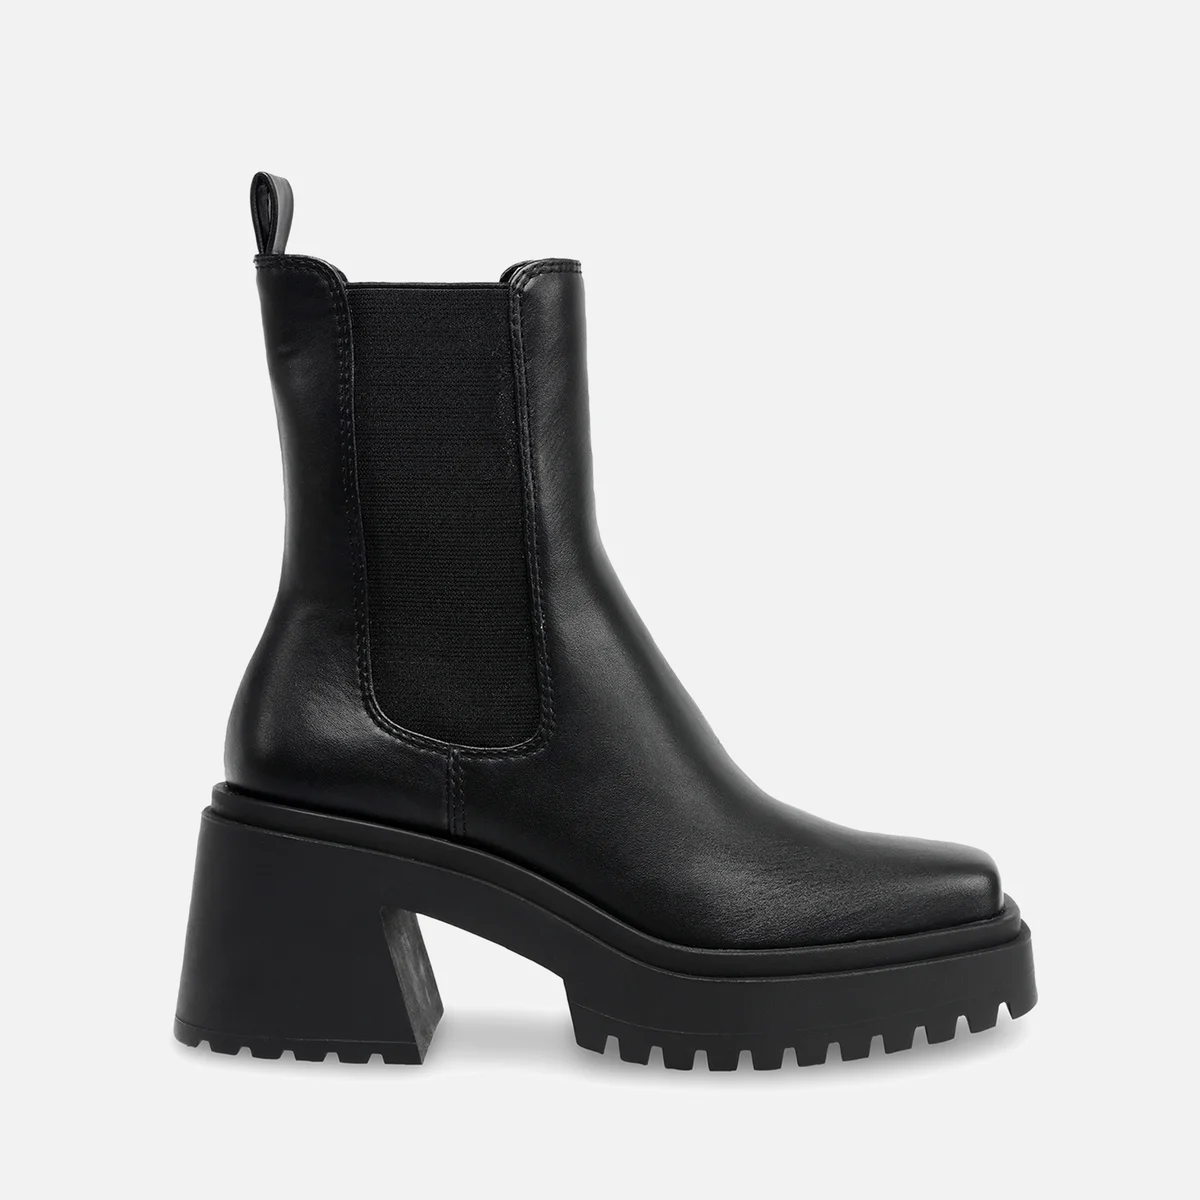 Steve Madden Parkway Leather Heeled Chelsea Boots Image 1